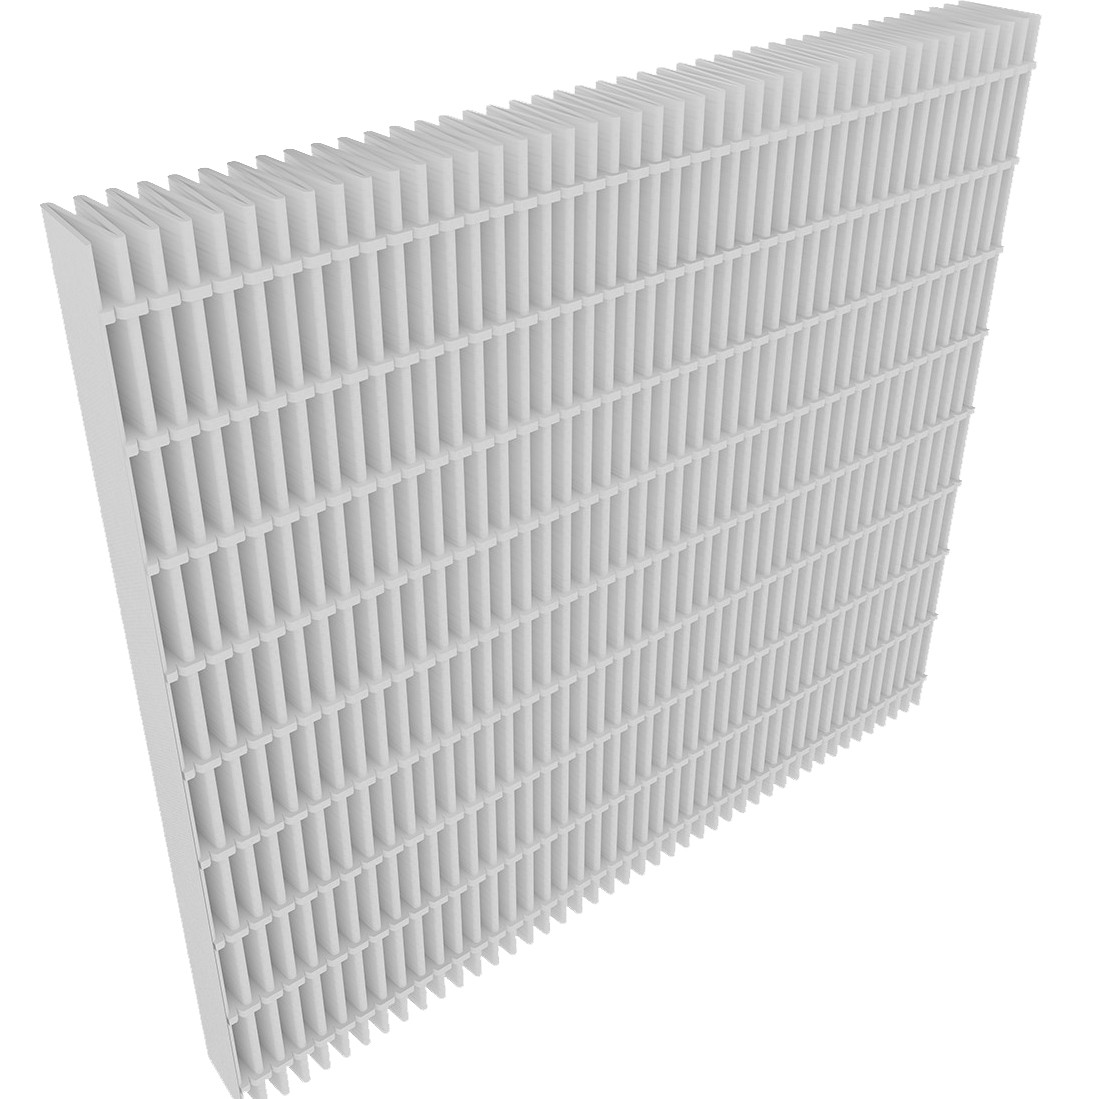 Broan MERV 13 Replacement Filter for AI Fresh Air Systems